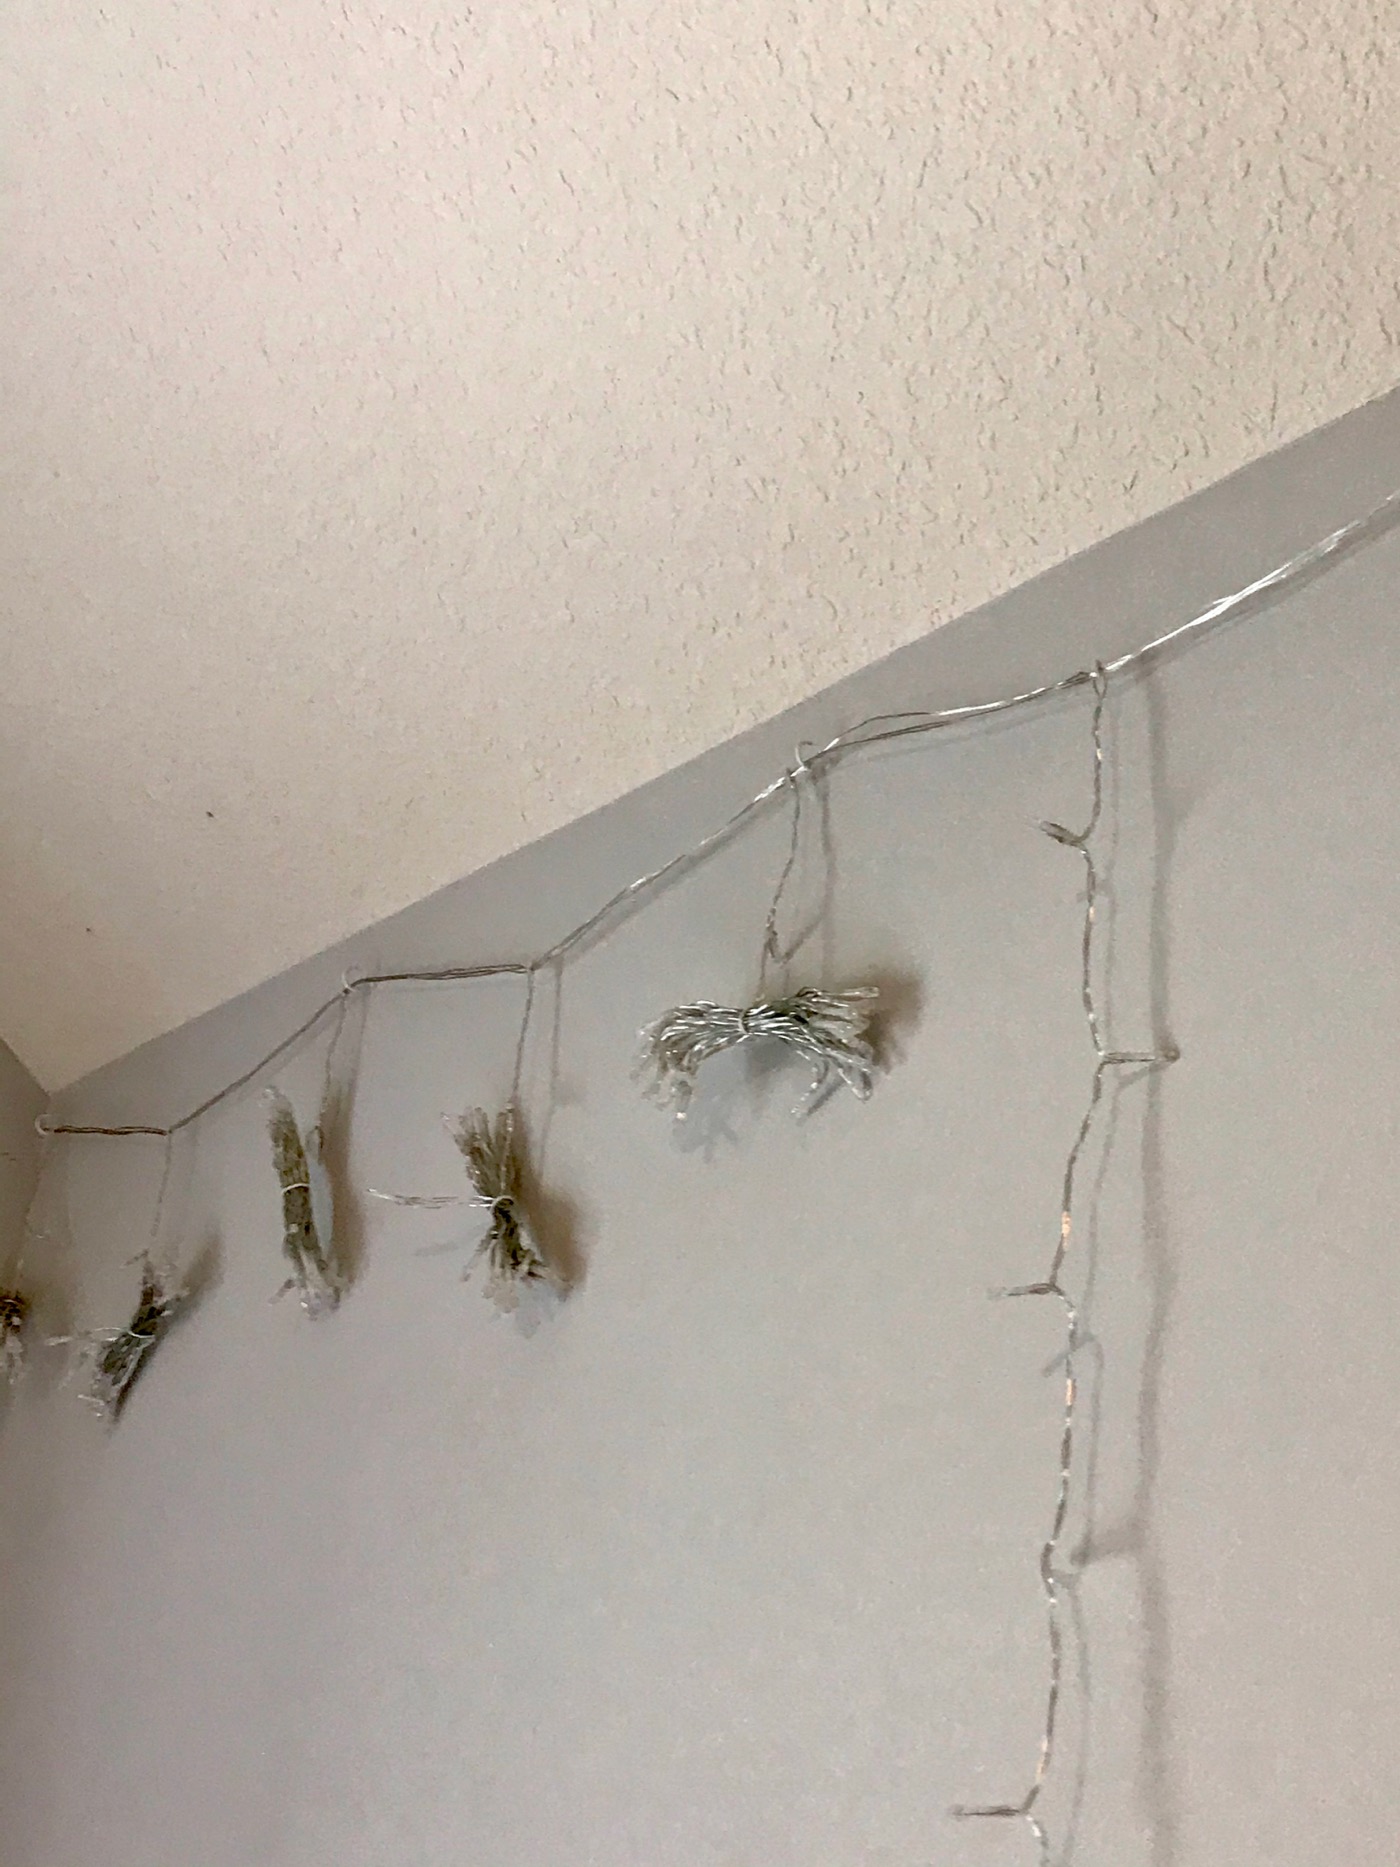 Easily Install Curtain Le Lights, How To Hang Curtain Fairy Lights On Wall